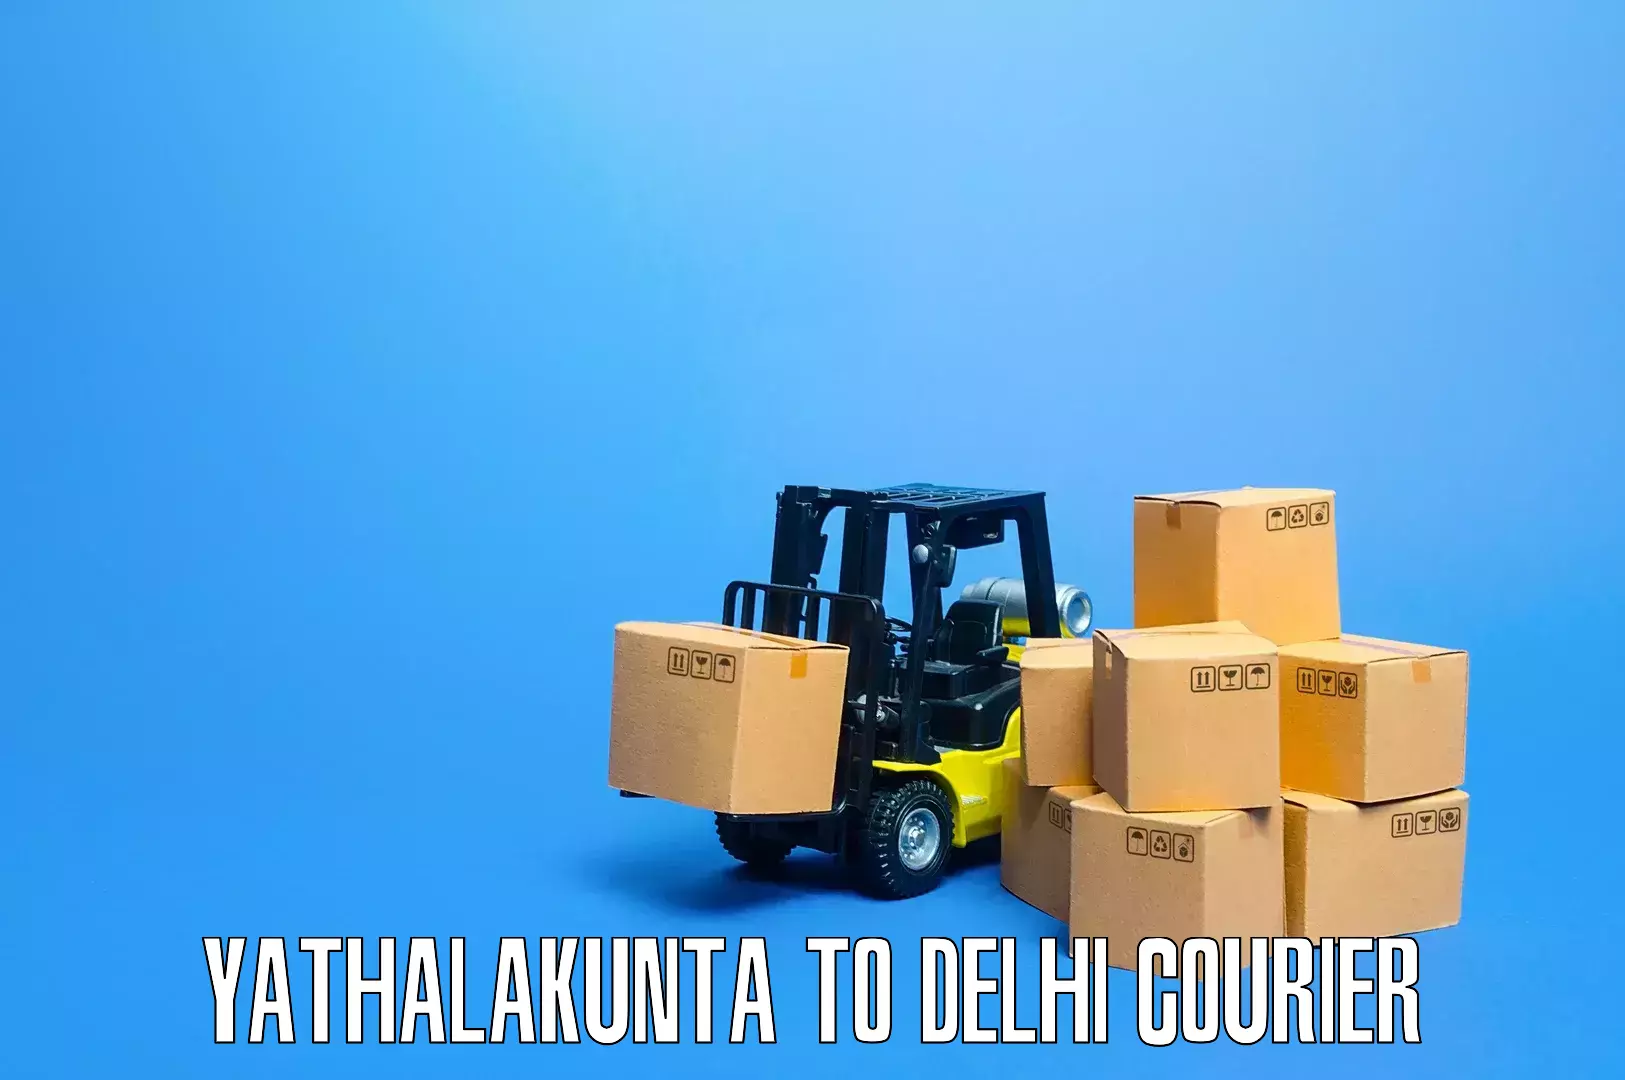 Reliable moving assistance Yathalakunta to Delhi